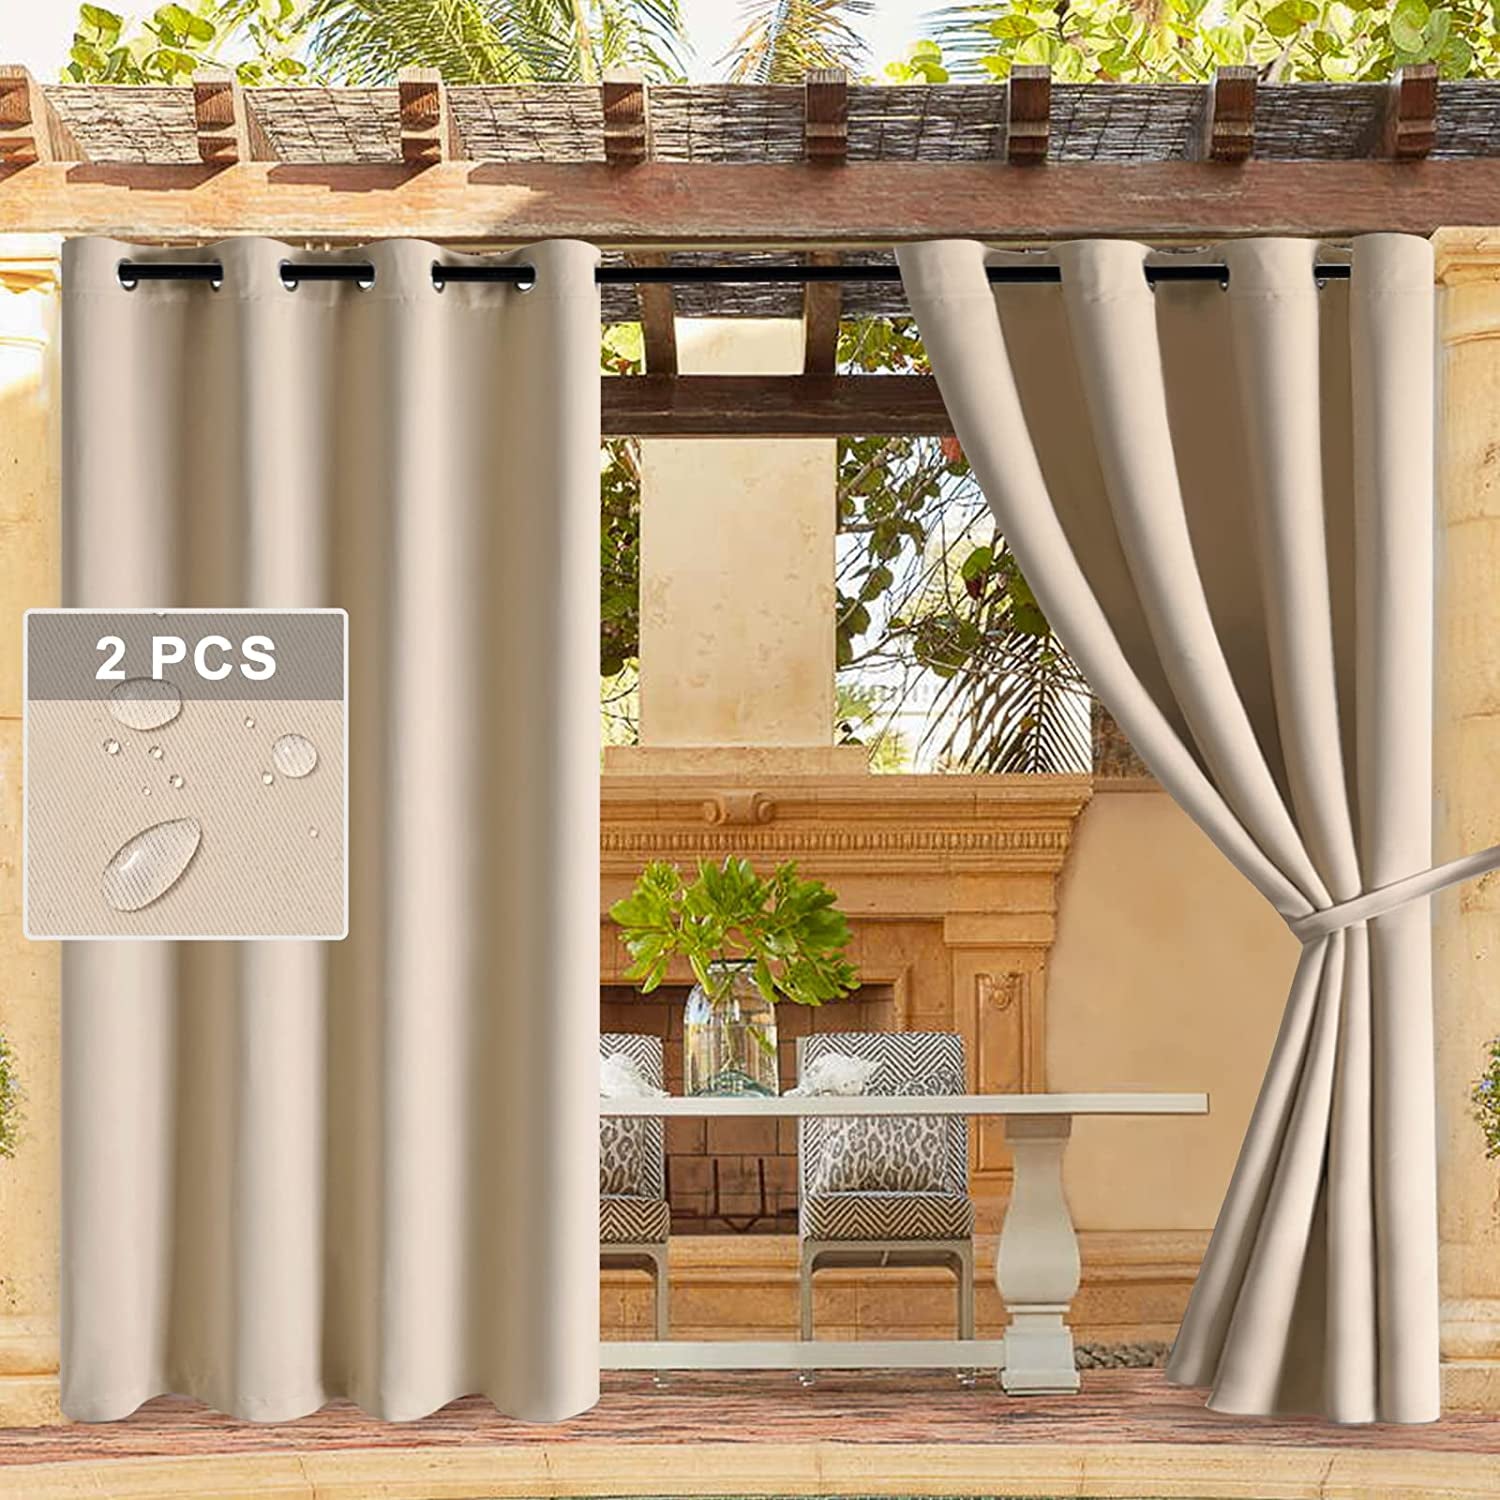 DWCN, DWCN Waterproof Outdoor Curtains for Patio - 52 X 95 Inches Long, Indoor Outdoor Thermal Insulated, Sun Blocking Grommet Blackout Curtains for Bedroom, Pergola, Porch and Cabana, Silver Grey, 2 Panels